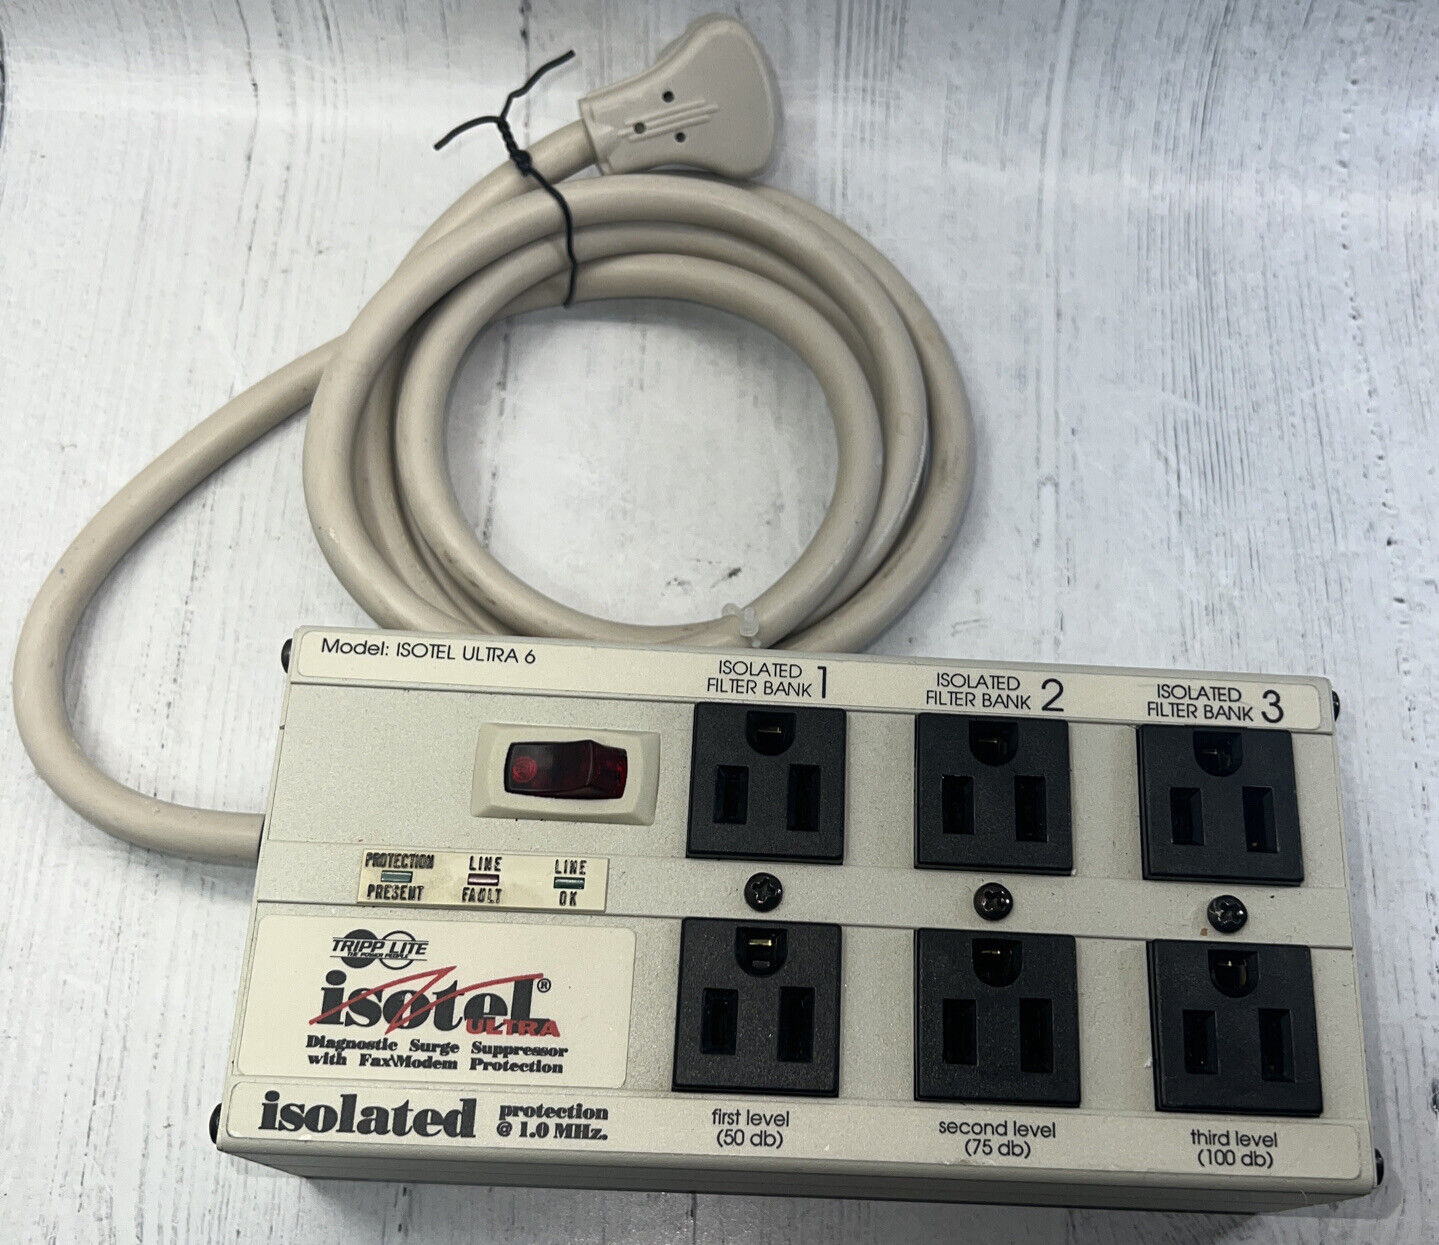 Tripp Lite Isotel 6 Ultra 6 Outlet Surge Protector With Fax Modem Protection